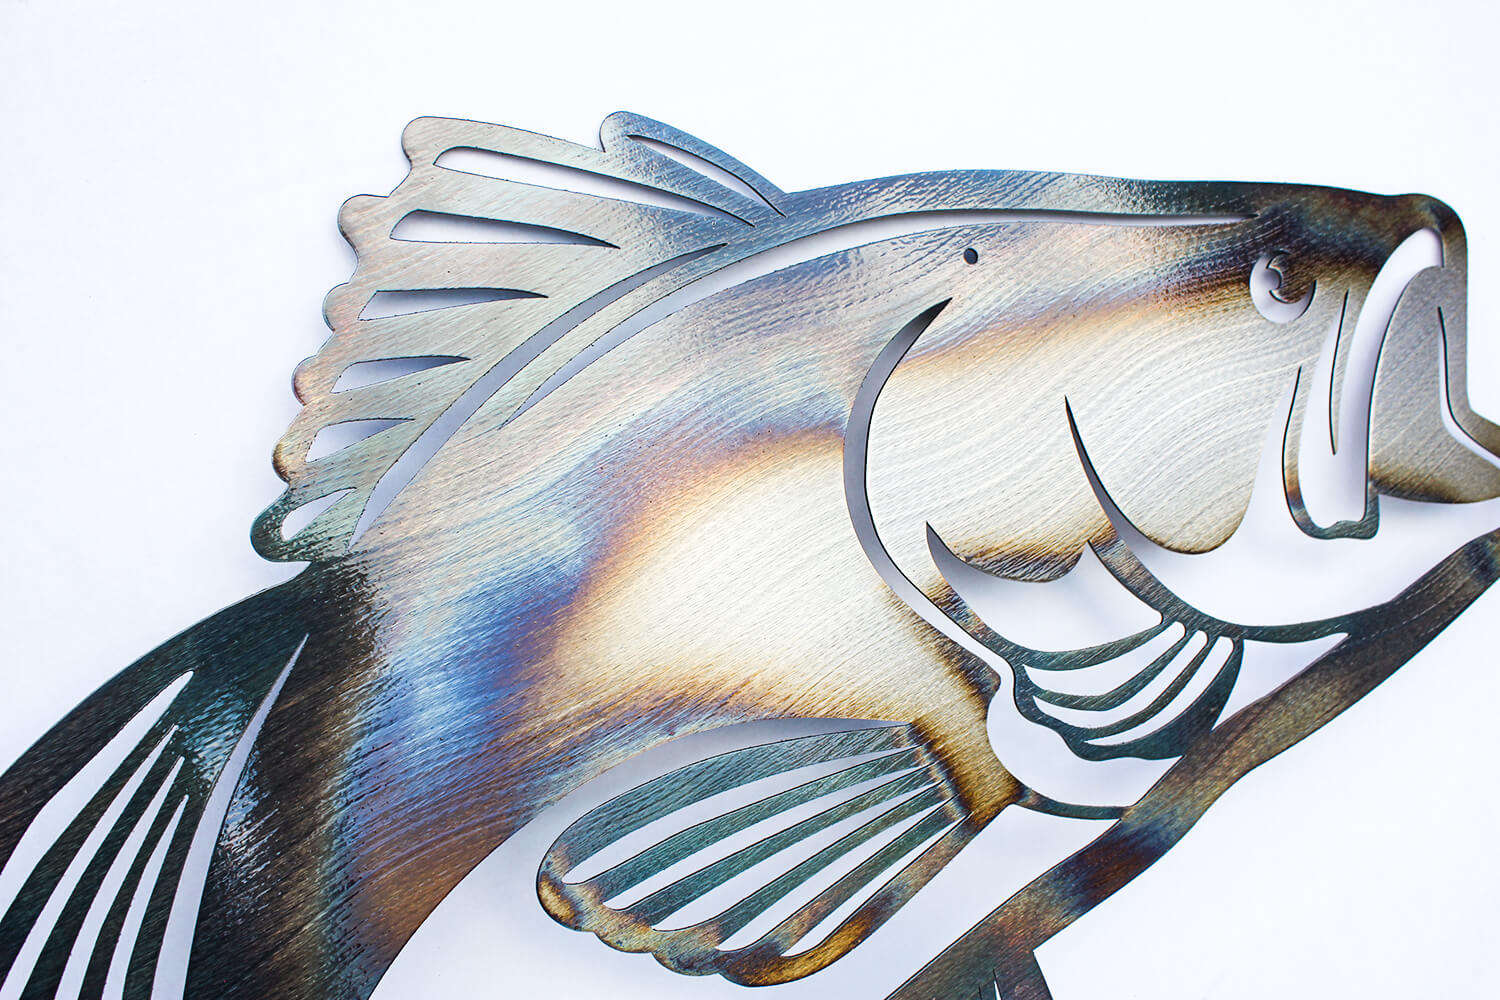 METAL FISH ART, 2 Sizes, Small Mouth Bass, Outdoor Metal Wall Art